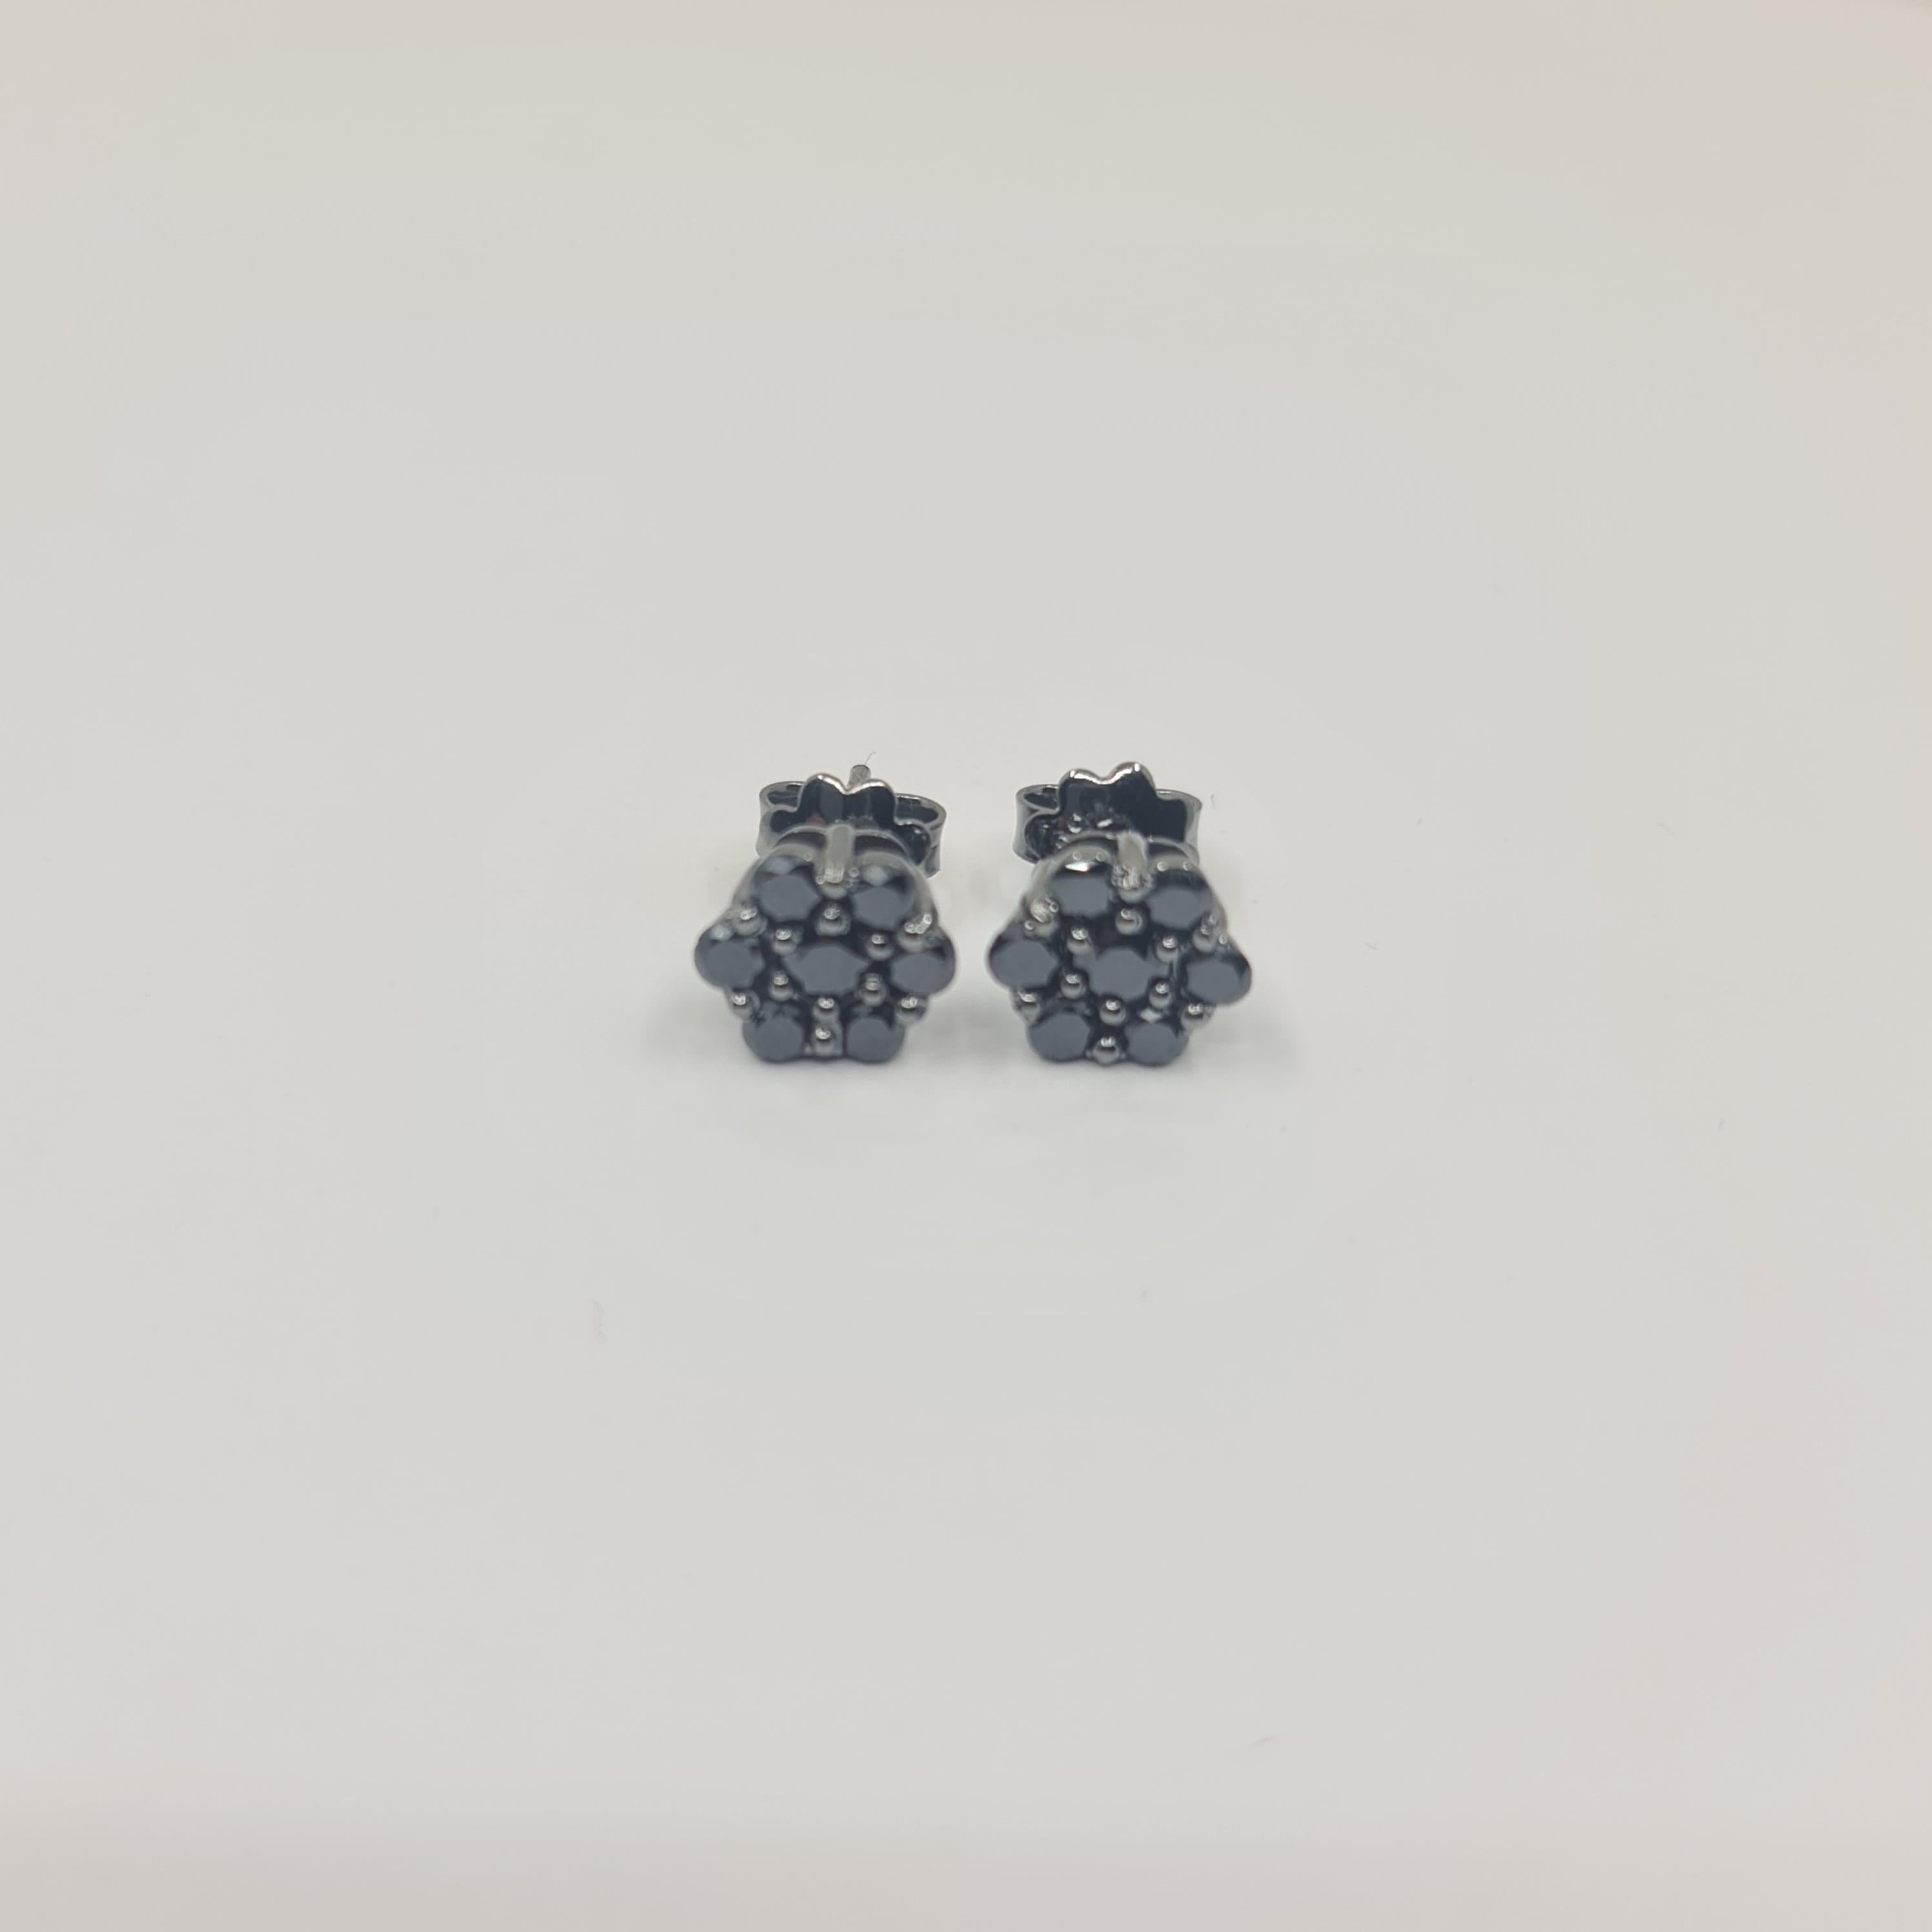 Modern Exquisite Black Diamond Earrings 1.11 Carat in 18K Black Gold Round Cut For Sale